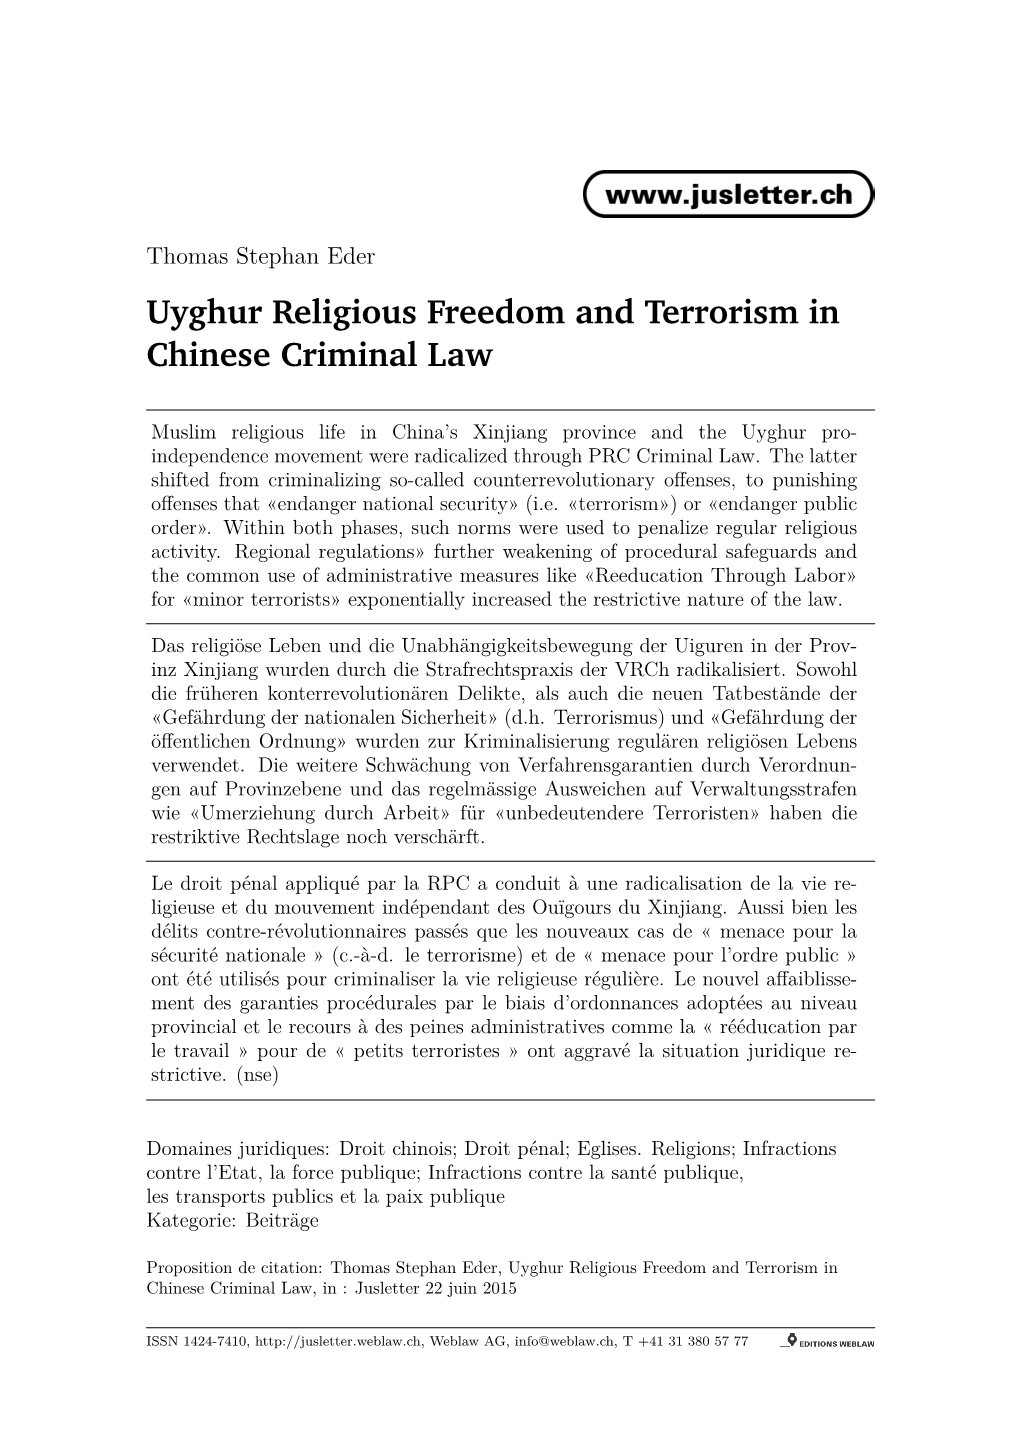 Uyghur Religious Freedom and Terrorism in Chinese Criminal Law